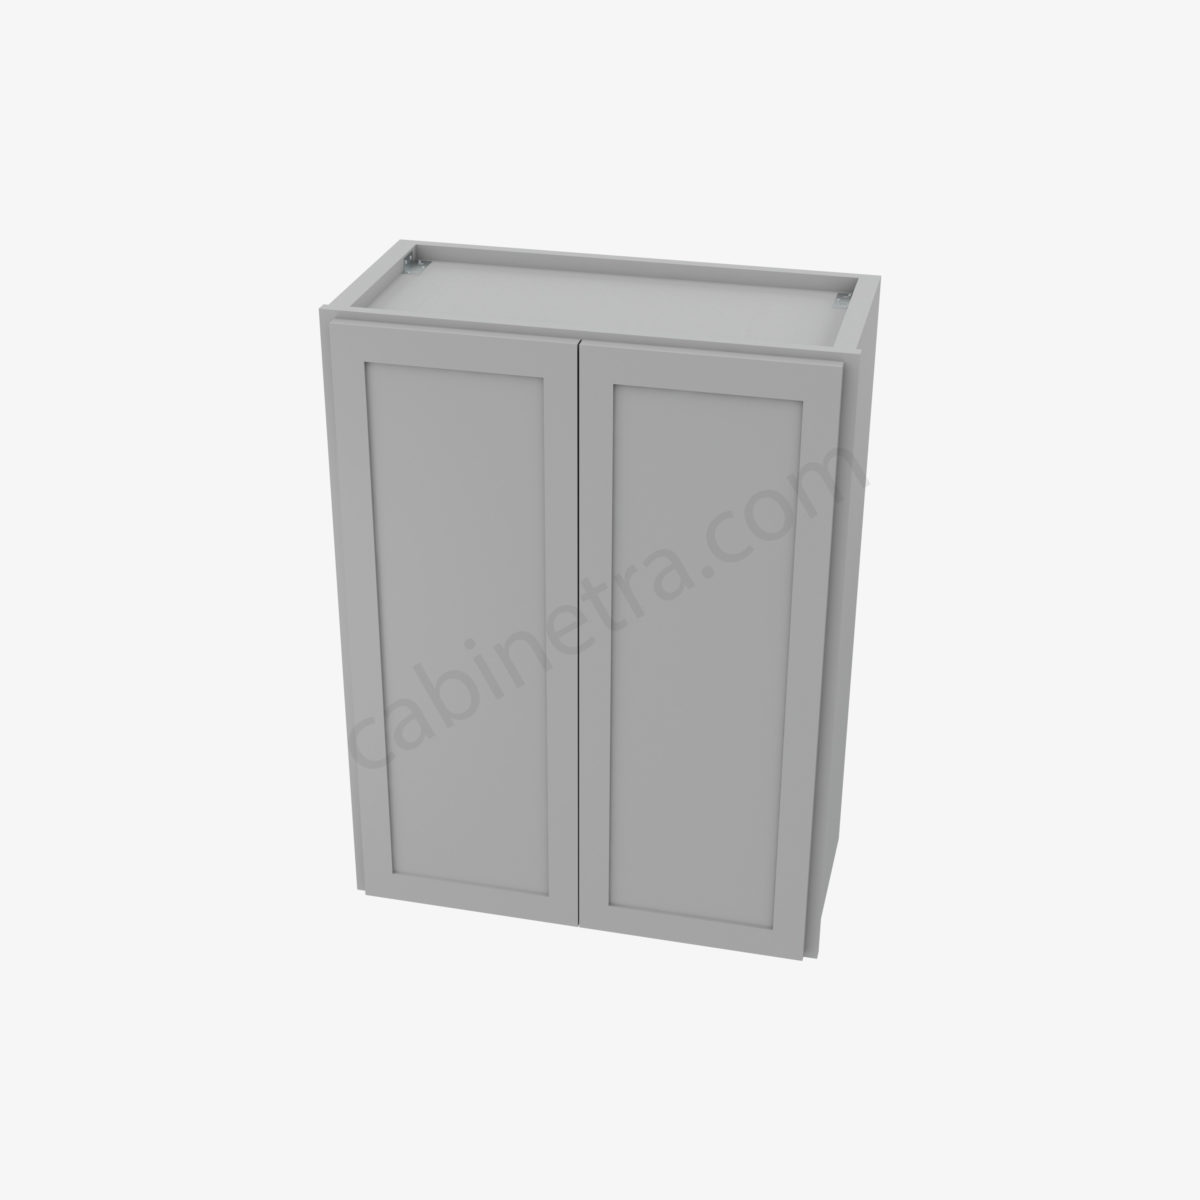 AB W2736B 3 Forevermark Lait Gray Shaker Cabinetra scaled